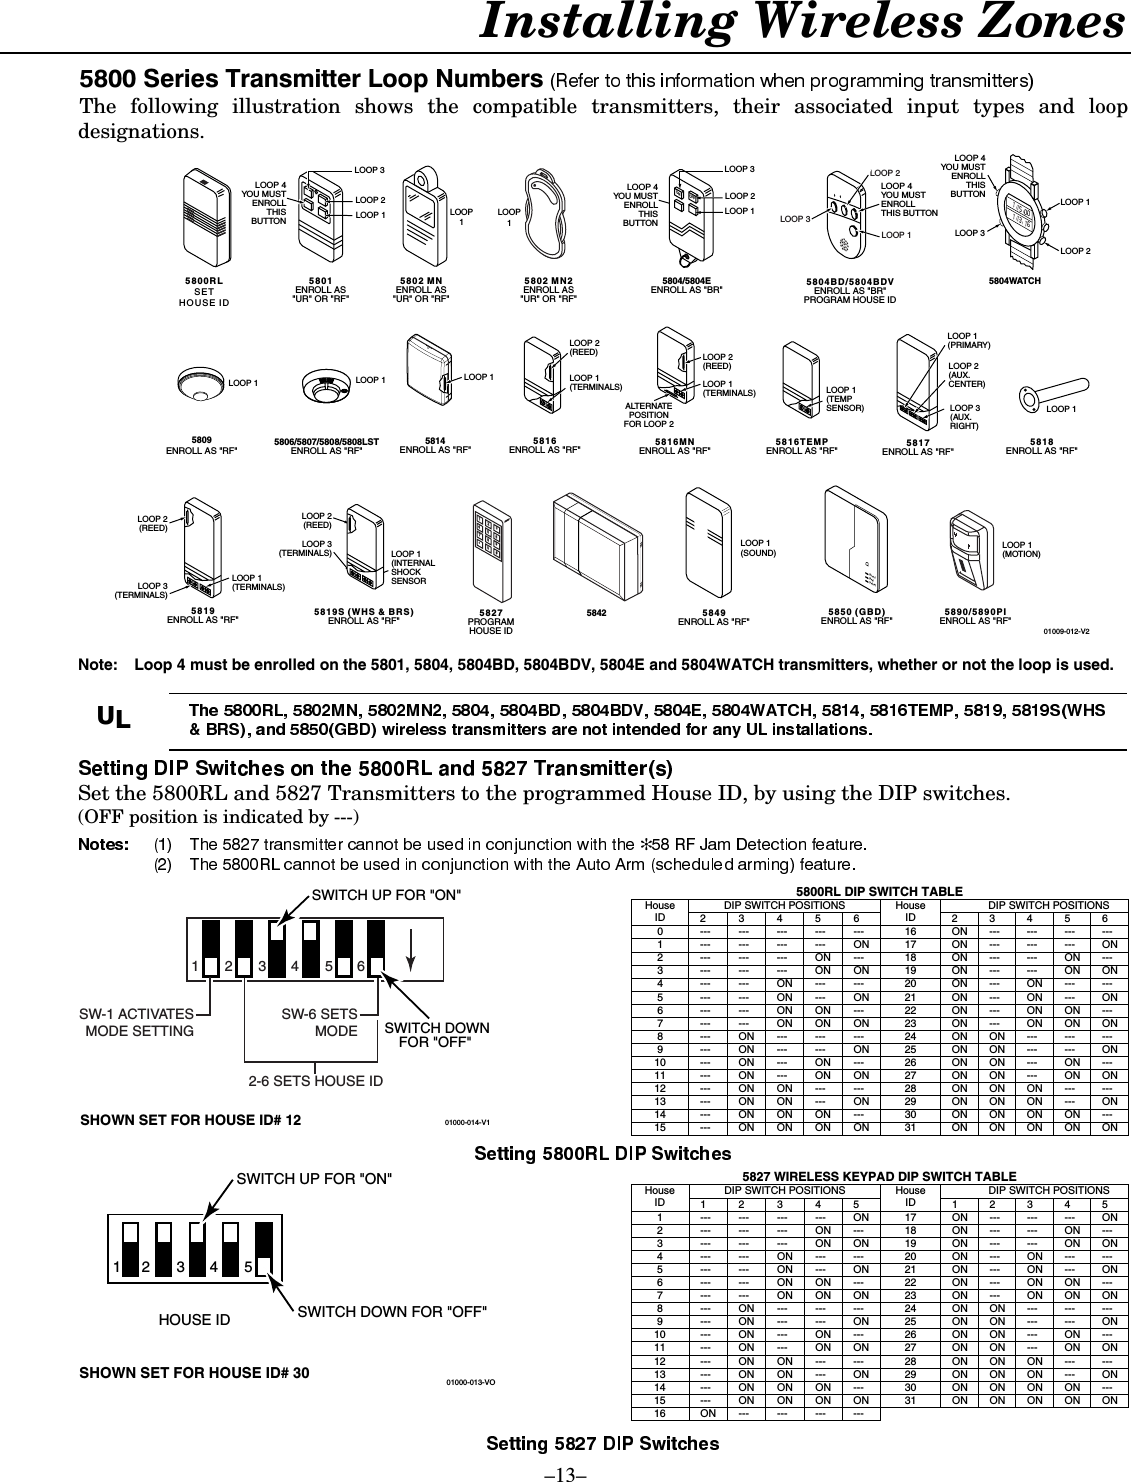 –13– Installing Wireless Zones  6HULHV7UDQVPLWWHU/RRS1XPEHUVThe following illustration shows the compatible transmitters, their associated input types and loop designations.  LOOP 15806/5807/5808/5808LSTENROLL AS &quot;RF&quot;58425804WATCHLOOP 15809ENROLL AS &quot;RF&quot;5818ENROLL AS &quot;RF&quot;LOOP 15849ENROLL AS &quot;RF&quot;LOOP 1(SOUND)5802 MN2ENROLL AS&quot;UR&quot; OR &quot;RF&quot;LOOP15850 (GBD)ENROLL AS &quot;RF&quot;LOOP 15814ENROLL AS &quot;RF&quot;01009-012-V2LOOP 1(MOTION)5890/5890PIENROLL AS &quot;RF&quot;LOOP15802 MNENROLL AS&quot;UR&quot; OR &quot;RF&quot;5804BD/5804BDVENROLL AS &quot;BR&quot;PROGRAM HOUSE IDLOOP 4YOU MUSTENROLLTHIS BUTTONLOOP 3LOOP 1LOOP 2•••••••••••••••••••5804/5804EENROLL AS &quot;BR&quot;LOOP 1LOOP 2LOOP 4YOU MUSTENROLLTHISBUTTONOFFLOOP 3ON5816TEMPENROLL AS &quot;RF&quot;LOOP 1(TEMPSENSOR)5817ENROLL AS &quot;RF&quot;LOOP 2(AUX.CENTER)LOOP 1(PRIMARY)LOOP 3(AUX.RIGHT)5816ENROLL AS &quot;RF&quot;LOOP 1(TERMINALS)LOOP 2(REED)5816MNENROLL AS &quot;RF&quot;LOOP 1(TERMINALS)ALTERNATEPOSITIONFOR LOOP 2LOOP 2(REED)LOOP 3(TERMINALS)5819S (WHS &amp; BRS)ENROLL AS &quot;RF&quot;LOOP 1(INTERNALSHOCKSENSORLOOP 2(REED)5819ENROLL AS &quot;RF&quot;LOOP 2(REED)LOOP 3(TERMINALS)LOOP 1(TERMINALS)5827PROGRAMHOUSE ID1234567890*#5800RLSETHOUSE ID5801ENROLL AS&quot;UR&quot; OR &quot;RF&quot;LOOP 3LOOP 1LOOP 2LOOP 4YOU MUSTENROLLTHISBUTTONLOOP 1LOOP 2LOOP 4YOU MUSTENROLLTHISBUTTONLOOP 3(Green)(Red)(Yellow)  Note:  Loop 4 must be enrolled on the 5801, 5804, 5804BD, 5804BDV, 5804E and 5804WATCH transmitters, whether or not the loop is used.  8/ Set the 5800RL and 5827 Transmitters to the programmed House ID, by using the DIP switches.  (OFF position is indicated by ---)  ✻  01000-014-V1234561SW-6 SETSMODE2-6 SETS HOUSE IDSW-1 ACTIVATESMODE SETTING SWITCH DOWNFOR &quot;OFF&quot; SHOWN SET FOR HOUSE ID# 12SWITCH UP FOR &quot;ON&quot;  5800RL DIP SWITCH TABLE DIP SWITCH POSITIONS  DIP SWITCH POSITIONS House ID  2 3 4 5 6 House ID  2 3 4 5 6 0  --- --- --- --- ---  16  ON --- --- --- --- 1  --- --- --- --- ON  17  ON --- --- --- ON 2  --- --- --- ON ---  18  ON --- --- ON --- 3  --- --- --- ON ON  19  ON --- --- ON ON 4  --- --- ON --- ---  20  ON --- ON --- --- 5  --- --- ON --- ON  21  ON --- ON --- ON 6  ---  ---  ON ON  ---  22  ON ---  ON ON --- 7  --- --- ON ON ON 23 ON --- ON ON ON 8  --- ON --- --- ---  24  ON ON --- --- --- 9  --- ON --- --- ON  25  ON ON --- --- ON 10  ---  ON ---  ON ---  26  ON ON ---  ON --- 11  ---  ON ---  ON ON  27  ON ON ---  ON ON 12  ---  ON ON ---  ---  28  ON ON ON ---  --- 13  ---  ON ON ---  ON  29  ON ON ON ---  ON 14  ---  ON ON ON  ---  30  ON ON ON ON --- 15  ---  ON ON ON  ON  31  ON ON ON ON ON   1  2  3  4  5HOUSE IDSWITCH UP FOR &quot;ON&quot; SWITCH DOWN FOR &quot;OFF&quot; SHOWN SET FOR HOUSE ID# 30 01000-013-VO 5827 WIRELESS KEYPAD DIP SWITCH TABLE DIP SWITCH POSITIONS  DIP SWITCH POSITIONS House ID  1 2 3 4 5 House ID  1 2 3 4 5 1  --- ---  --- --- ON  17  ON --- --- --- ON 2  --- --- --- ON ---  18  ON --- --- ON --- 3  --- --- --- ON ON  19  ON --- --- ON ON 4  ---  ---  ON ---  ---  20  ON ---  ON ---  --- 5  --- --- ON --- ON 21 ON --- ON --- ON 6  ---  ---  ON ON ---  22  ON ---  ON ON --- 7  ---  ---  ON ON ON  23  ON ---  ON ON ON 8  --- ON --- --- ---  24  ON ON --- --- --- 9  --- ON --- --- ON  25  ON ON --- --- ON 10  ---  ON ---  ON ---  26  ON ON ---  ON --- 11  ---  ON ---  ON ON  27  ON ON ---  ON ON 12  ---  ON ON ---  ---  28  ON ON ON ---  --- 13  ---  ON ON ---  ON  29  ON ON ON ---  ON 14  ---  ON ON ON ---  30  ON ON ON ON --- 15  ---  ON ON ON ON  31  ON ON ON ON ON 16 ON --- --- --- ---                       